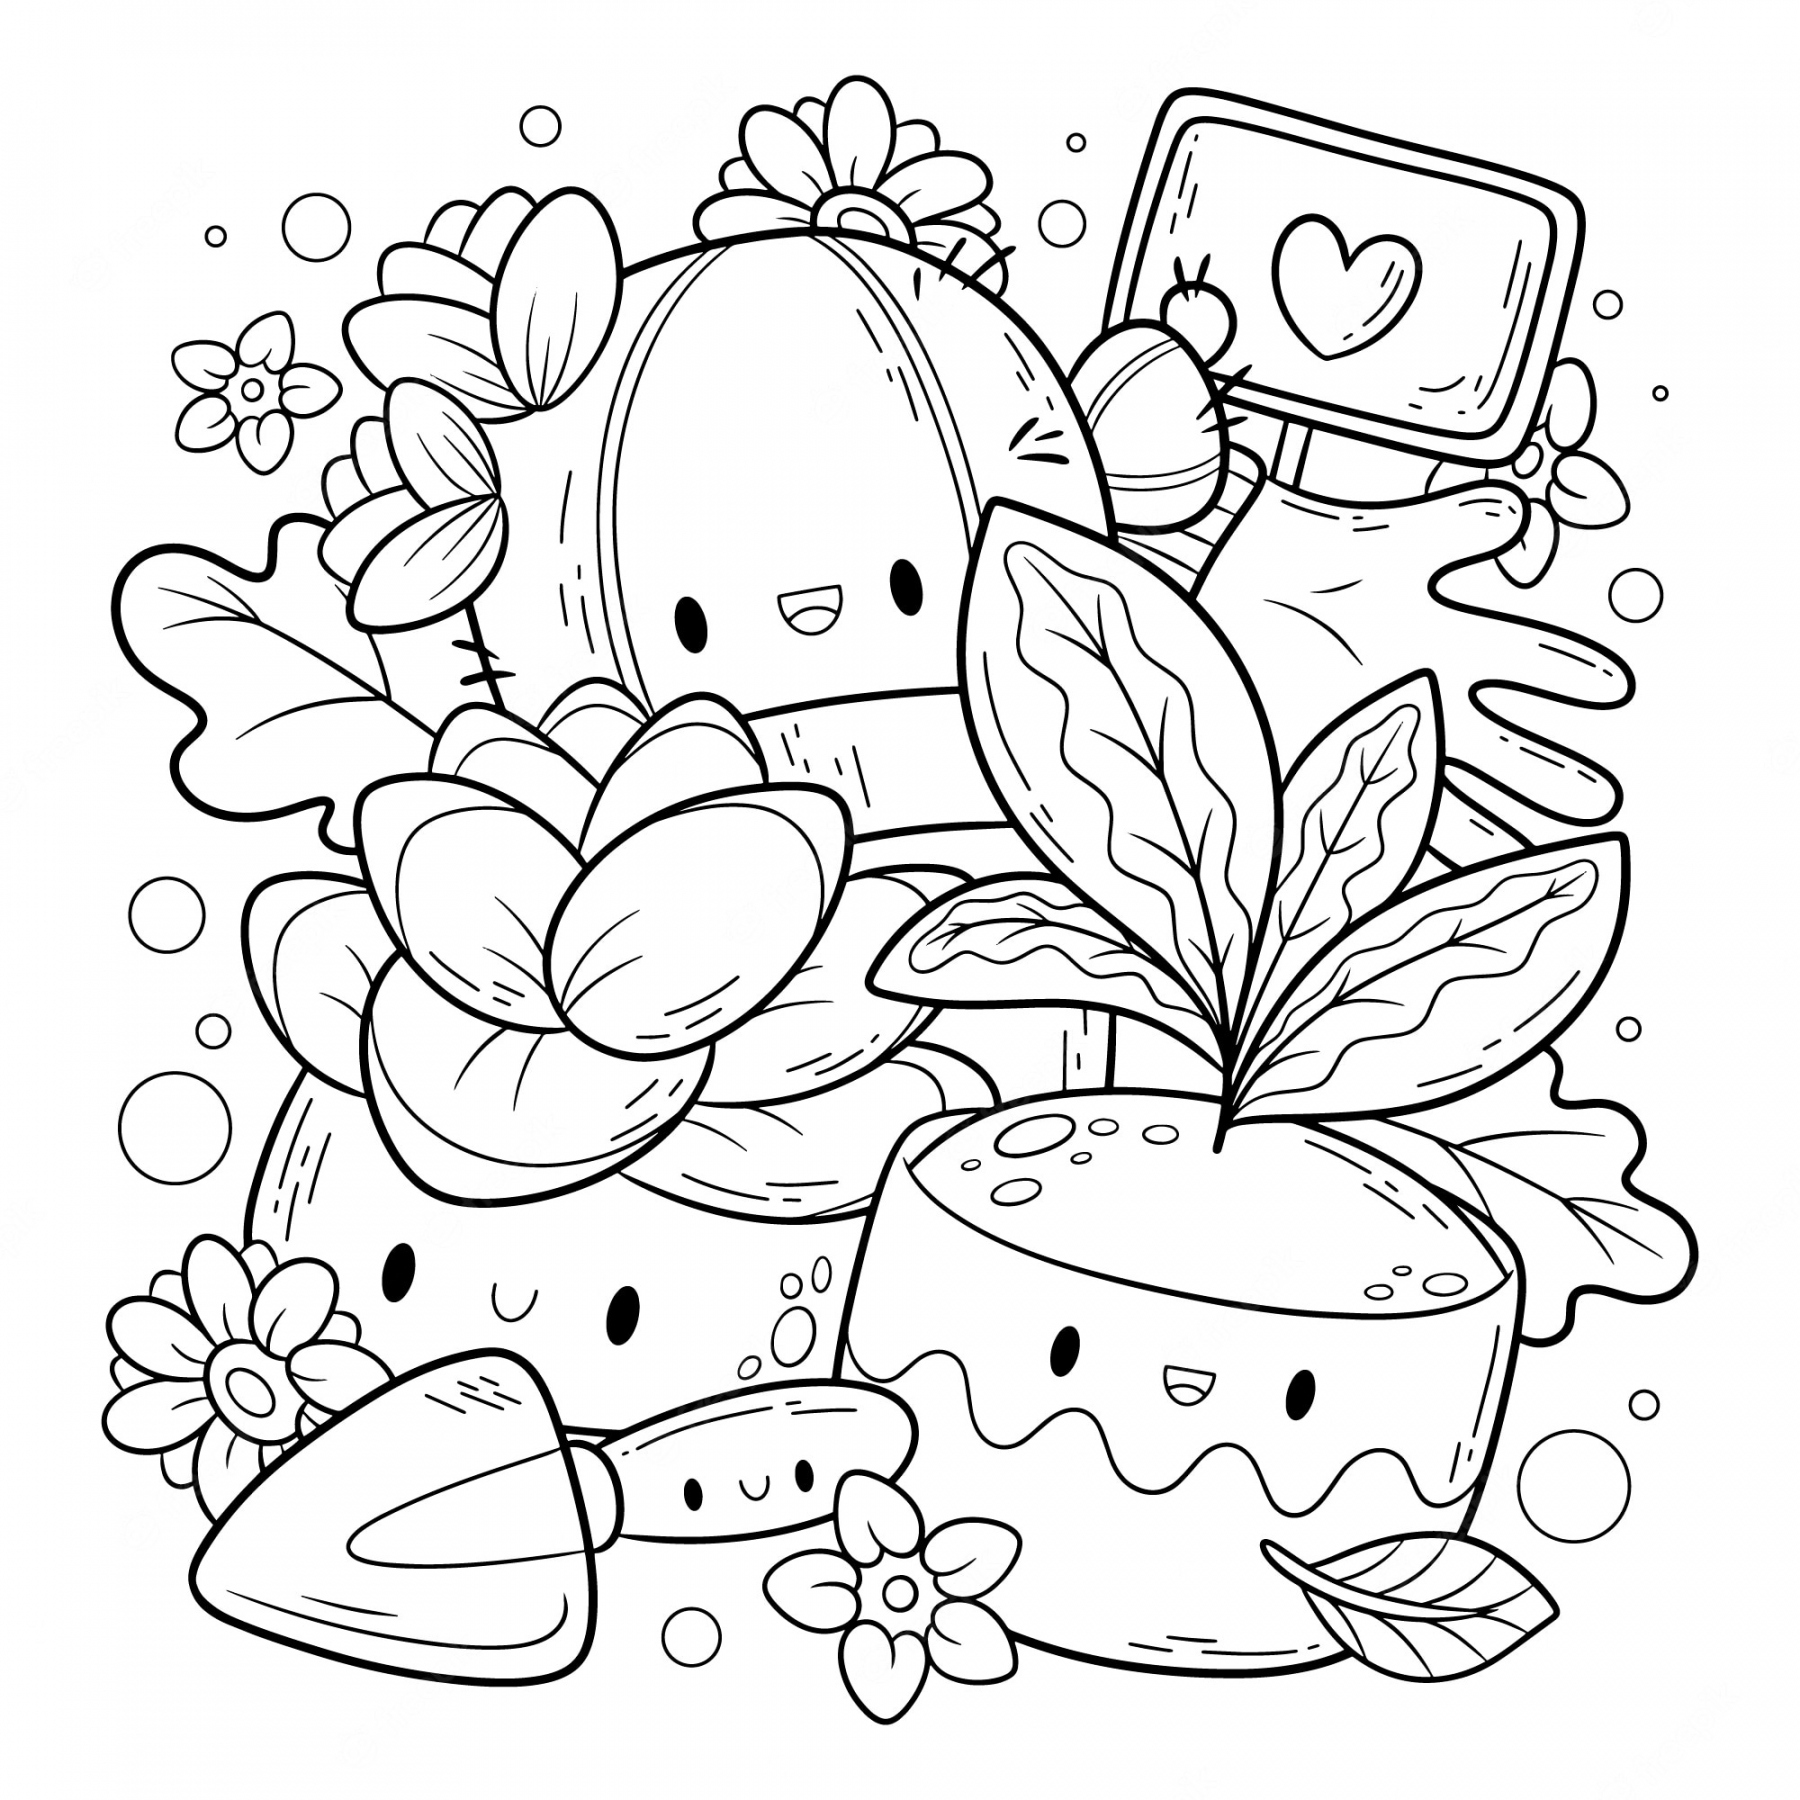 Kawaii Coloring Page Images - Free Download on Freepik - FREE Printables - Free Printable Cute Coloring Pages